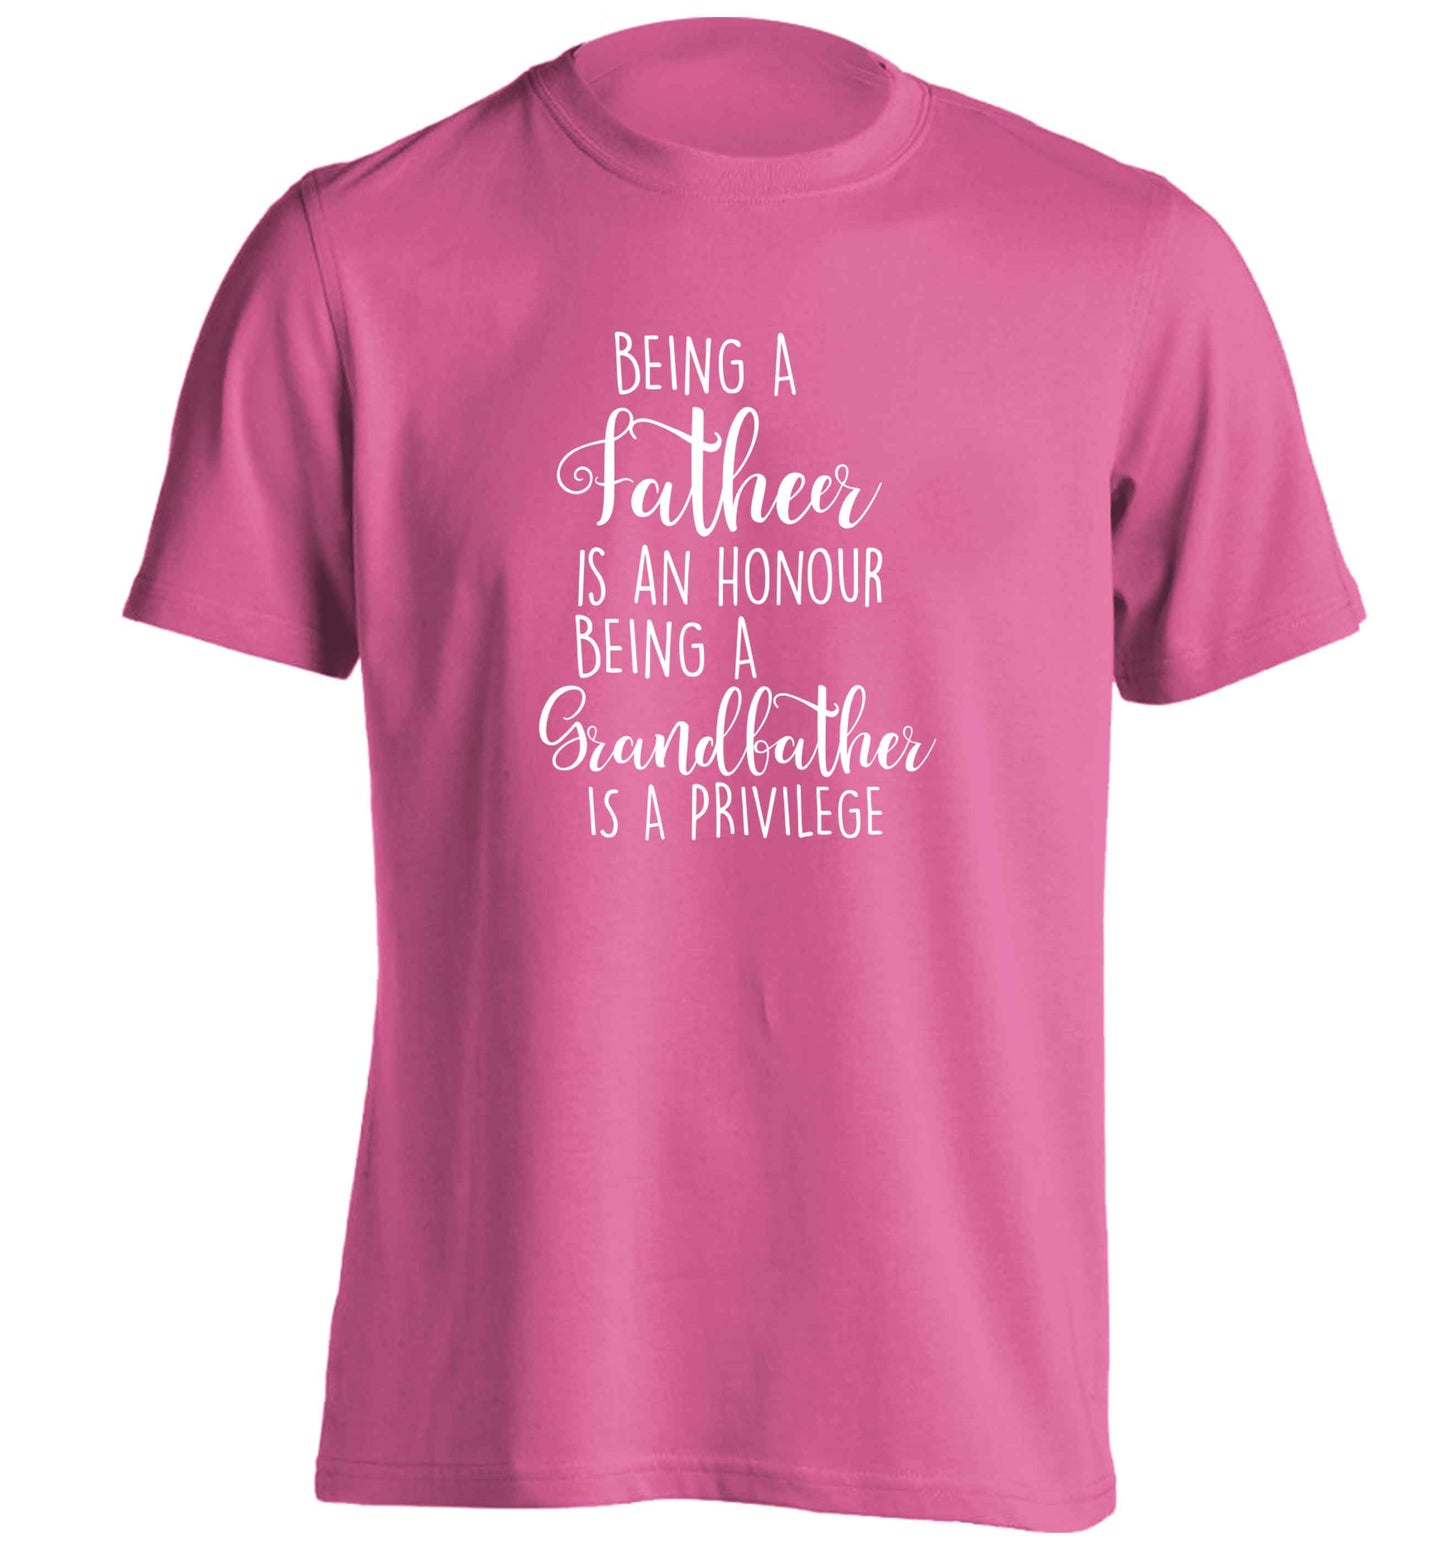 Being a father is an honour being a grandfather is a privilege adults unisex pink Tshirt 2XL